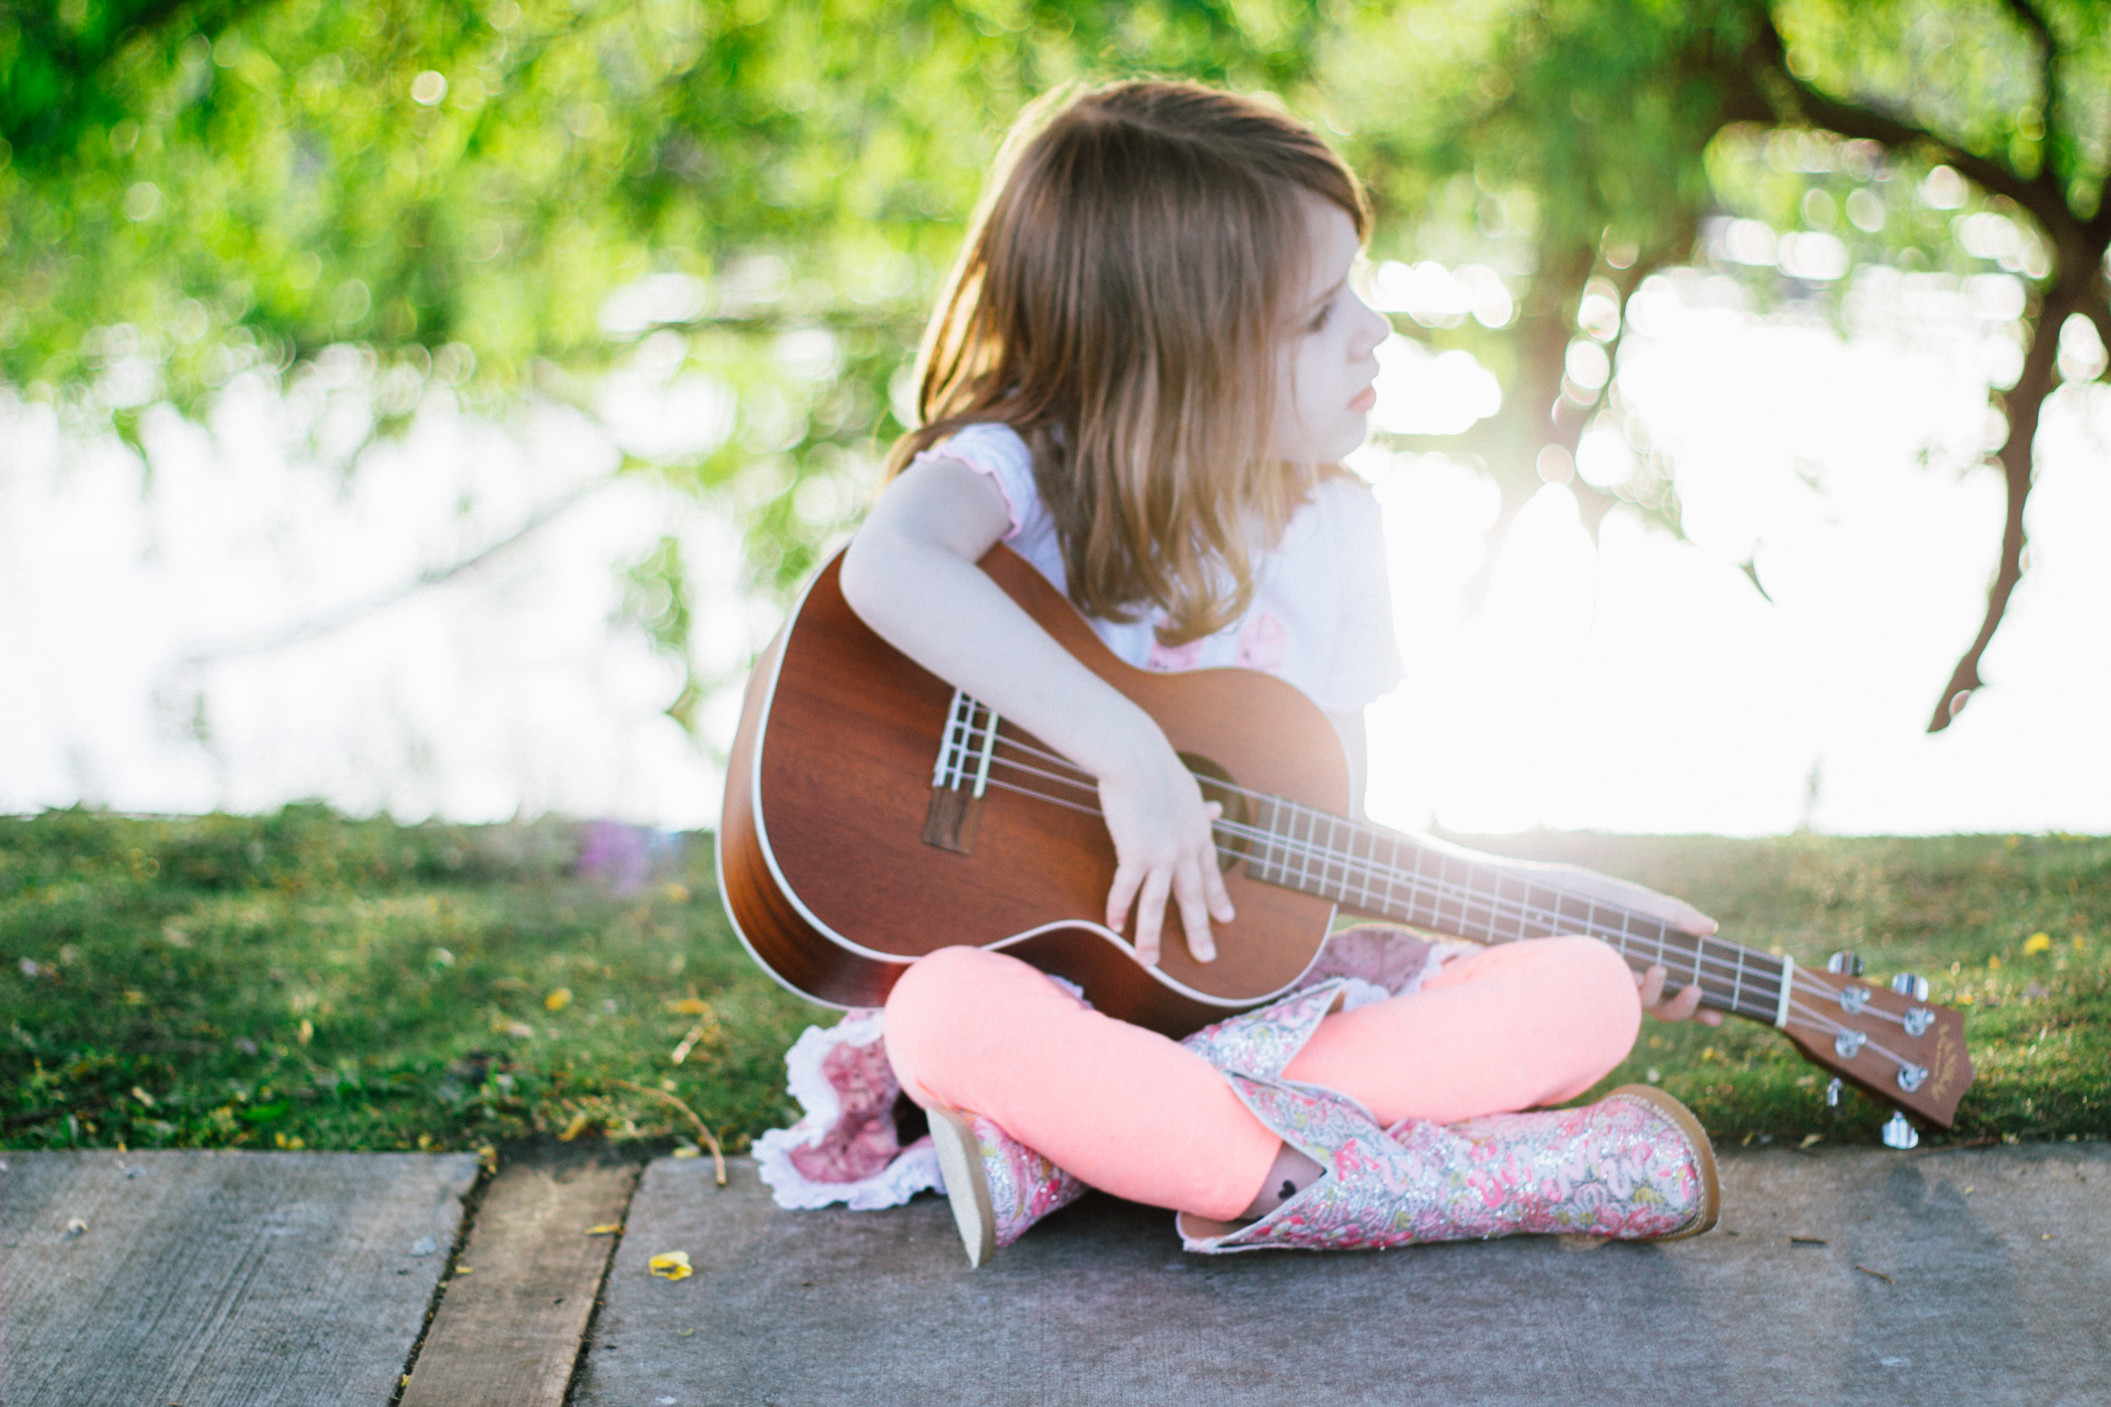 a-young-girl-playing-ukulele-in-a-park-under-a-tree-at-sunset_t20_AepE11